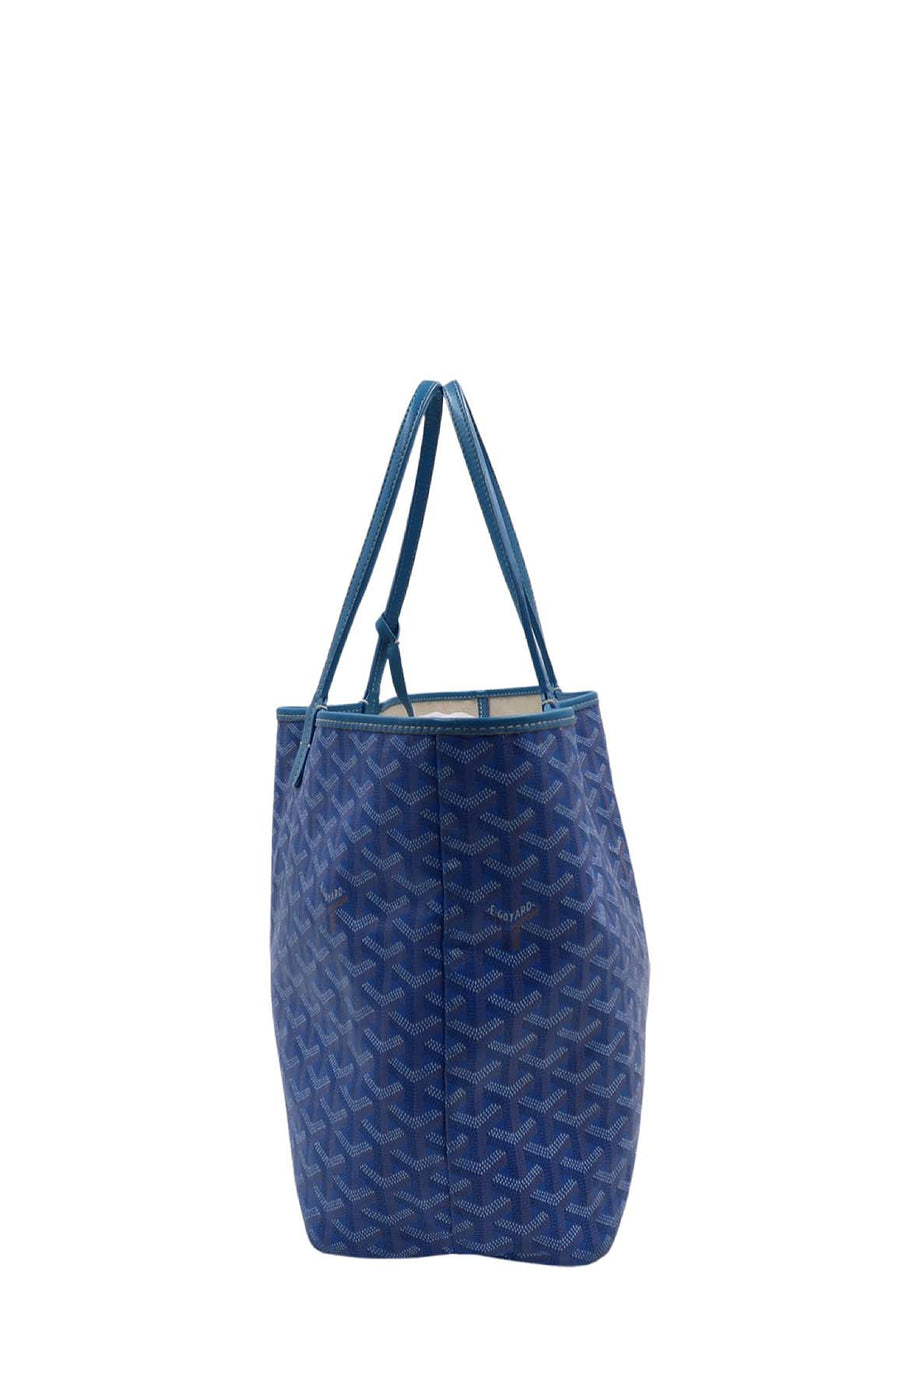 Find more Pm Blue Goyard St. Louis Tote - Excellent Condition for sale at  up to 90% off